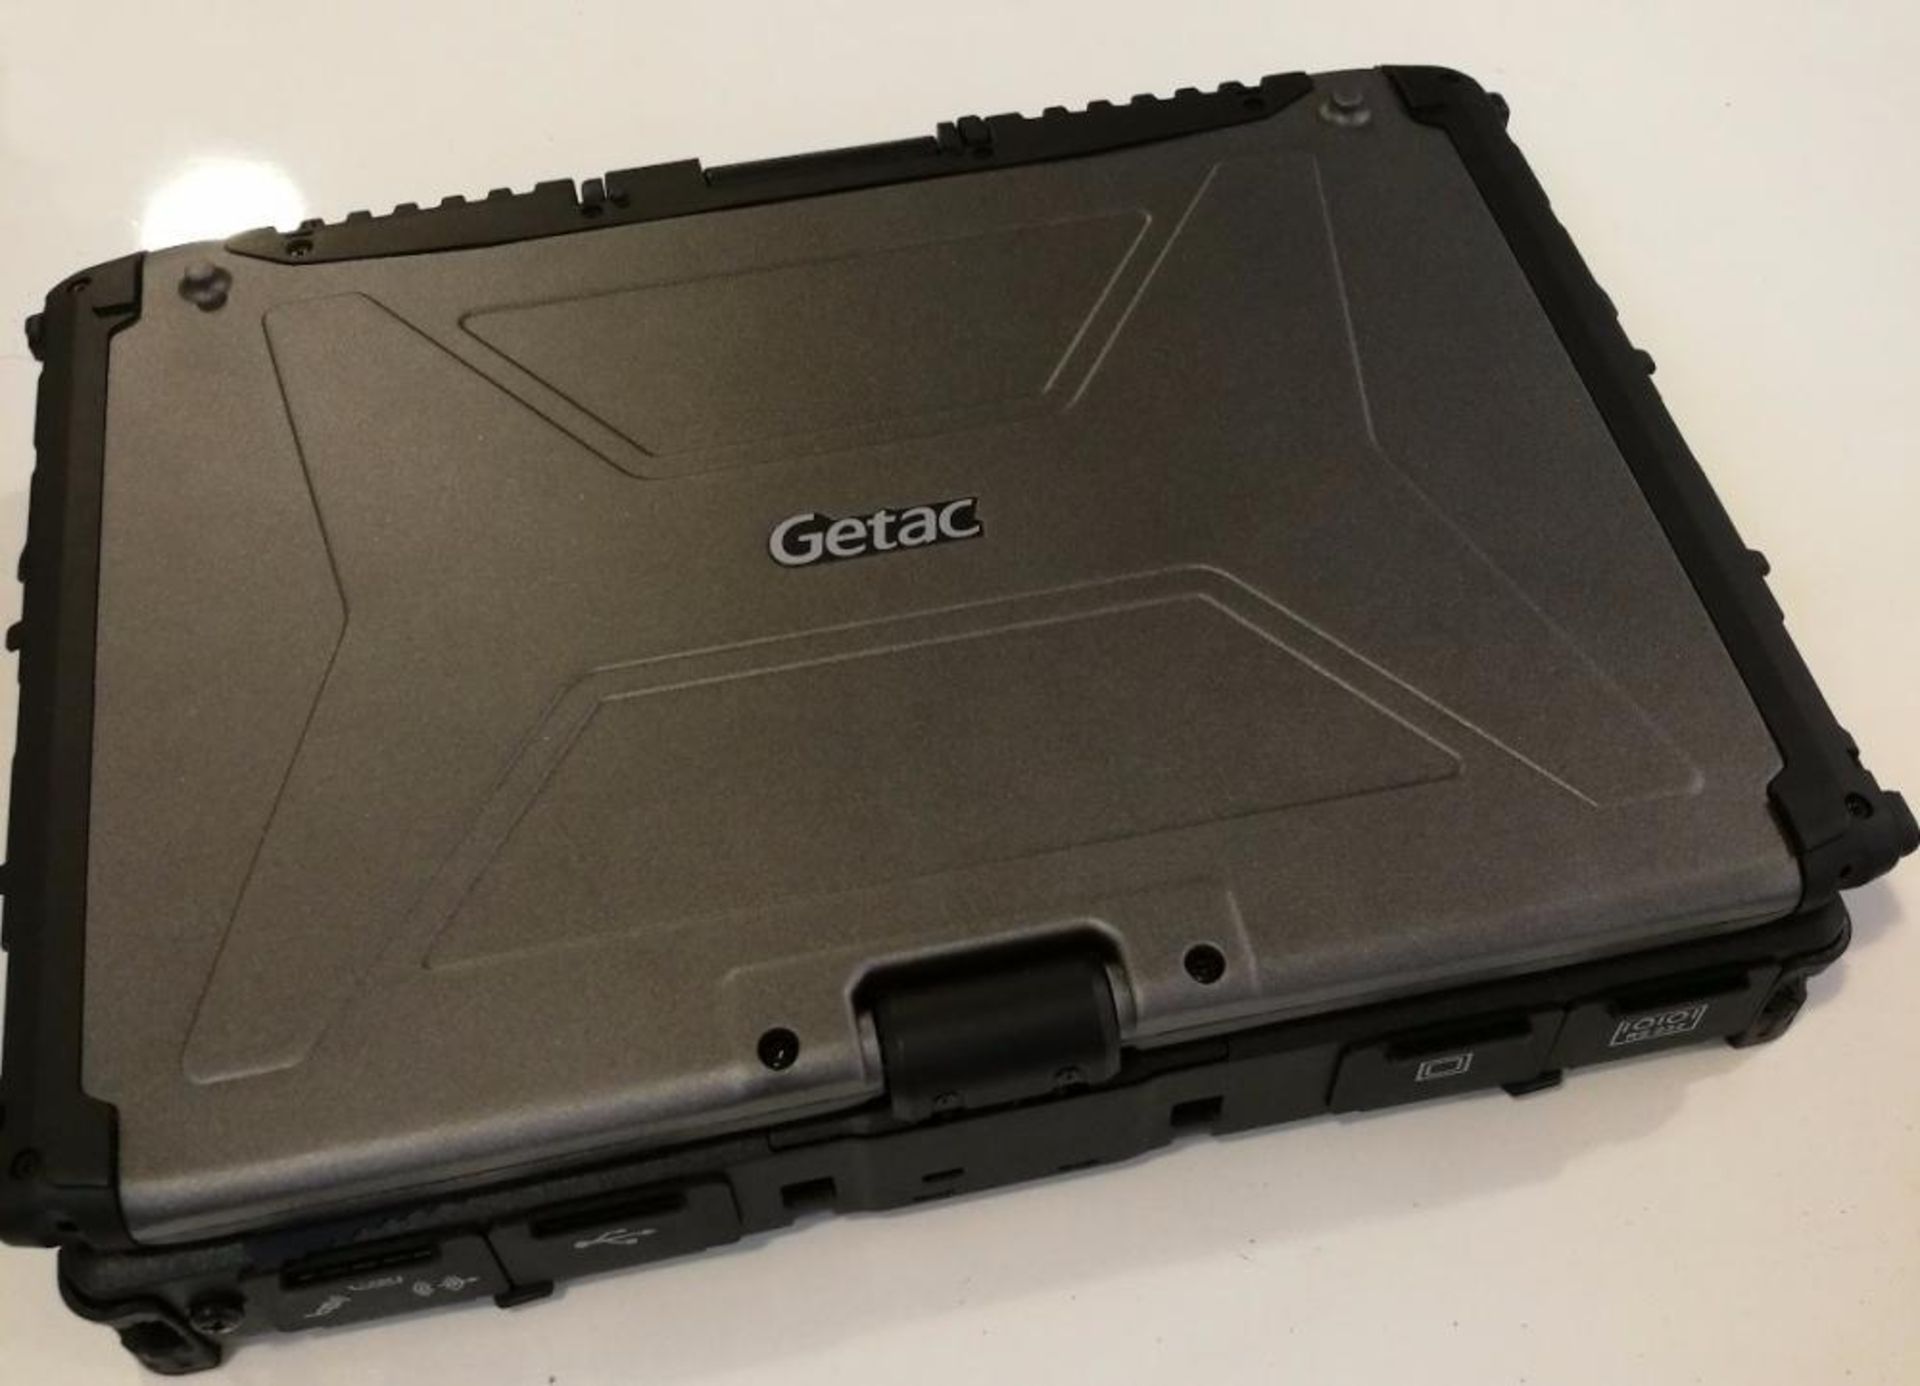 1 x Getac V200 Rugged Laptop Computer - Rugged Laptop That Transforms into a Tablet PC - Features an - Image 7 of 9